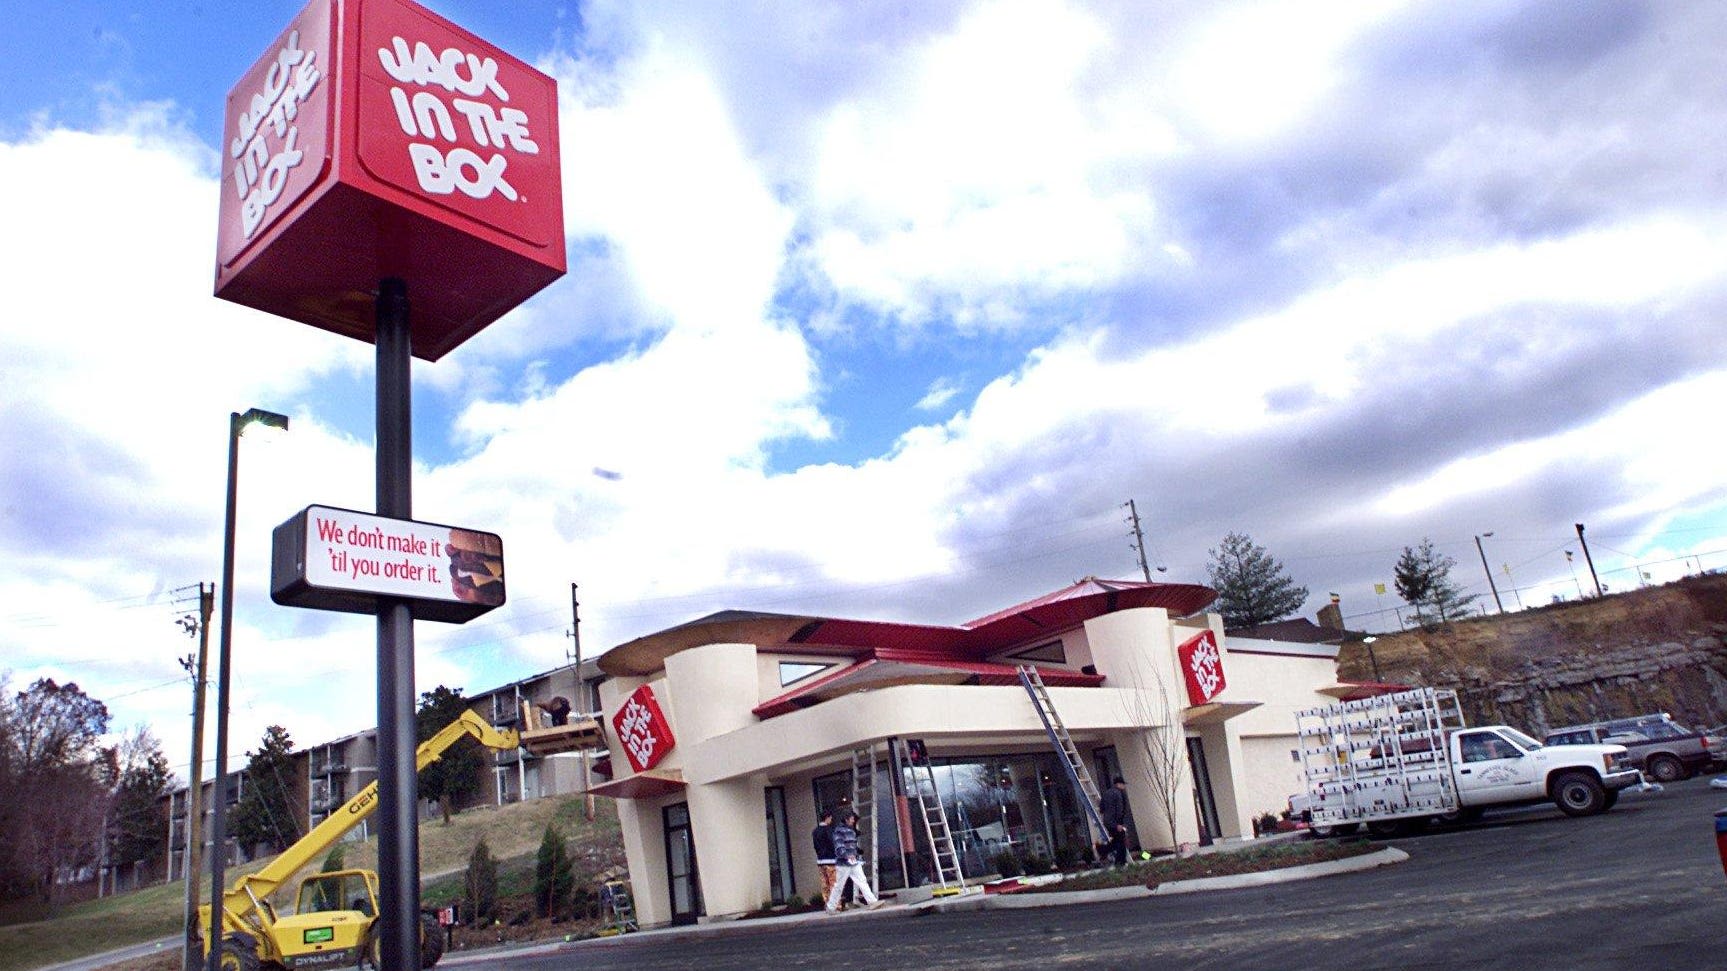 Jack in the Box expanding into Florida. Here are 6 things to know about the fast-food chain